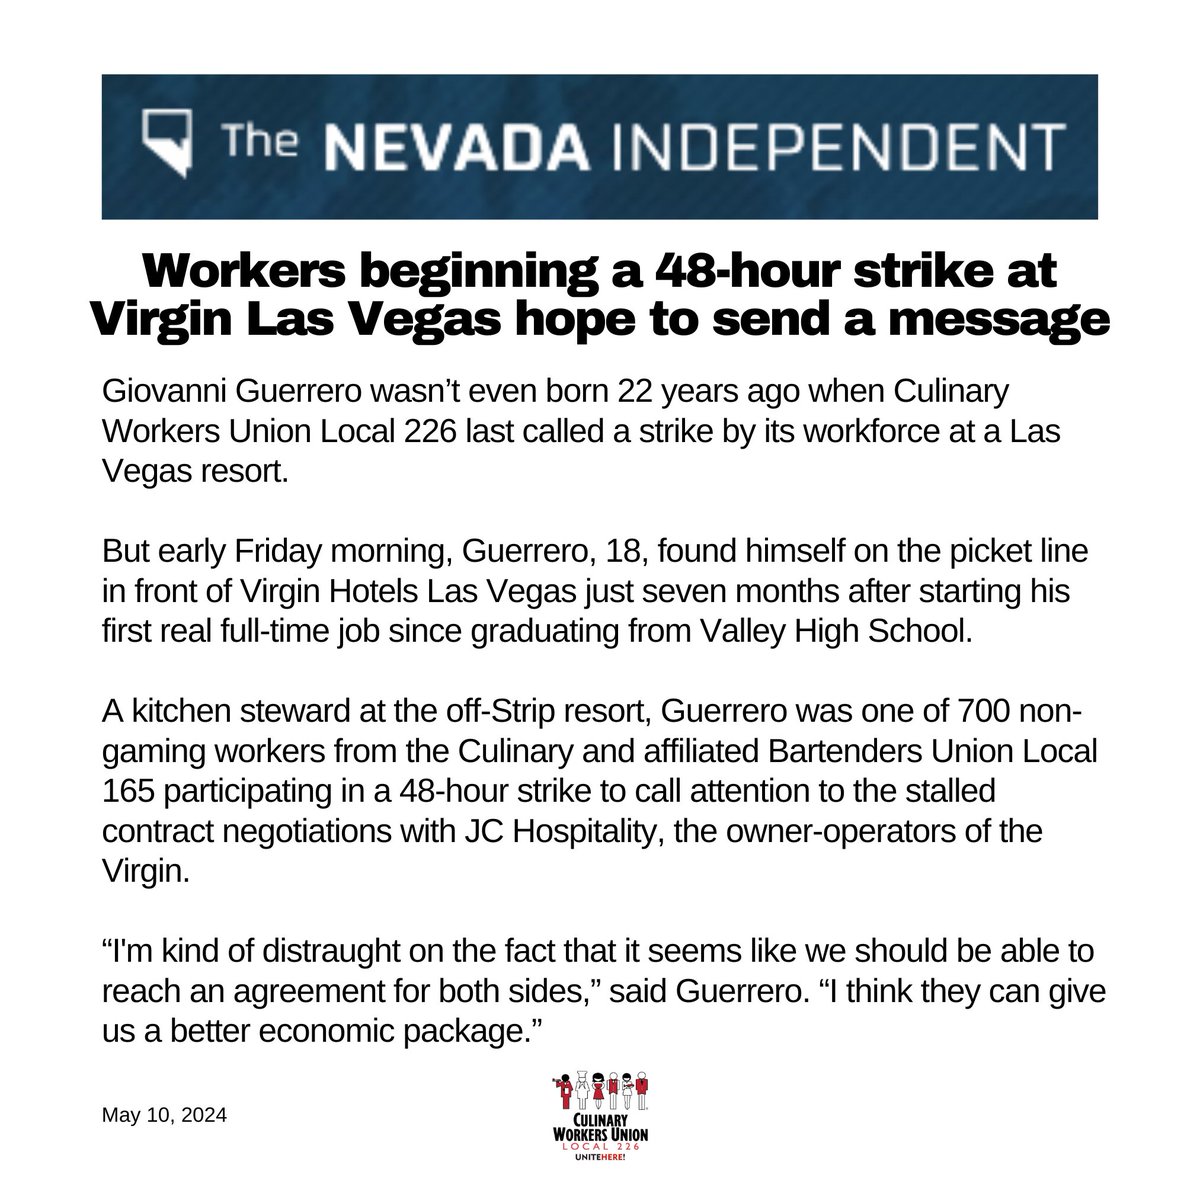 Guerrero was one of 700 non-gaming workers from the Culinary & Bartenders Union Local 165 participating in a 48-hour strike to call attention to the stalled contract negotiations w/JC Hospitality, owner-operators of @VirginHotelsLV. thenevadaindependent.com/article/worker… #OneJobShouldBeEnough